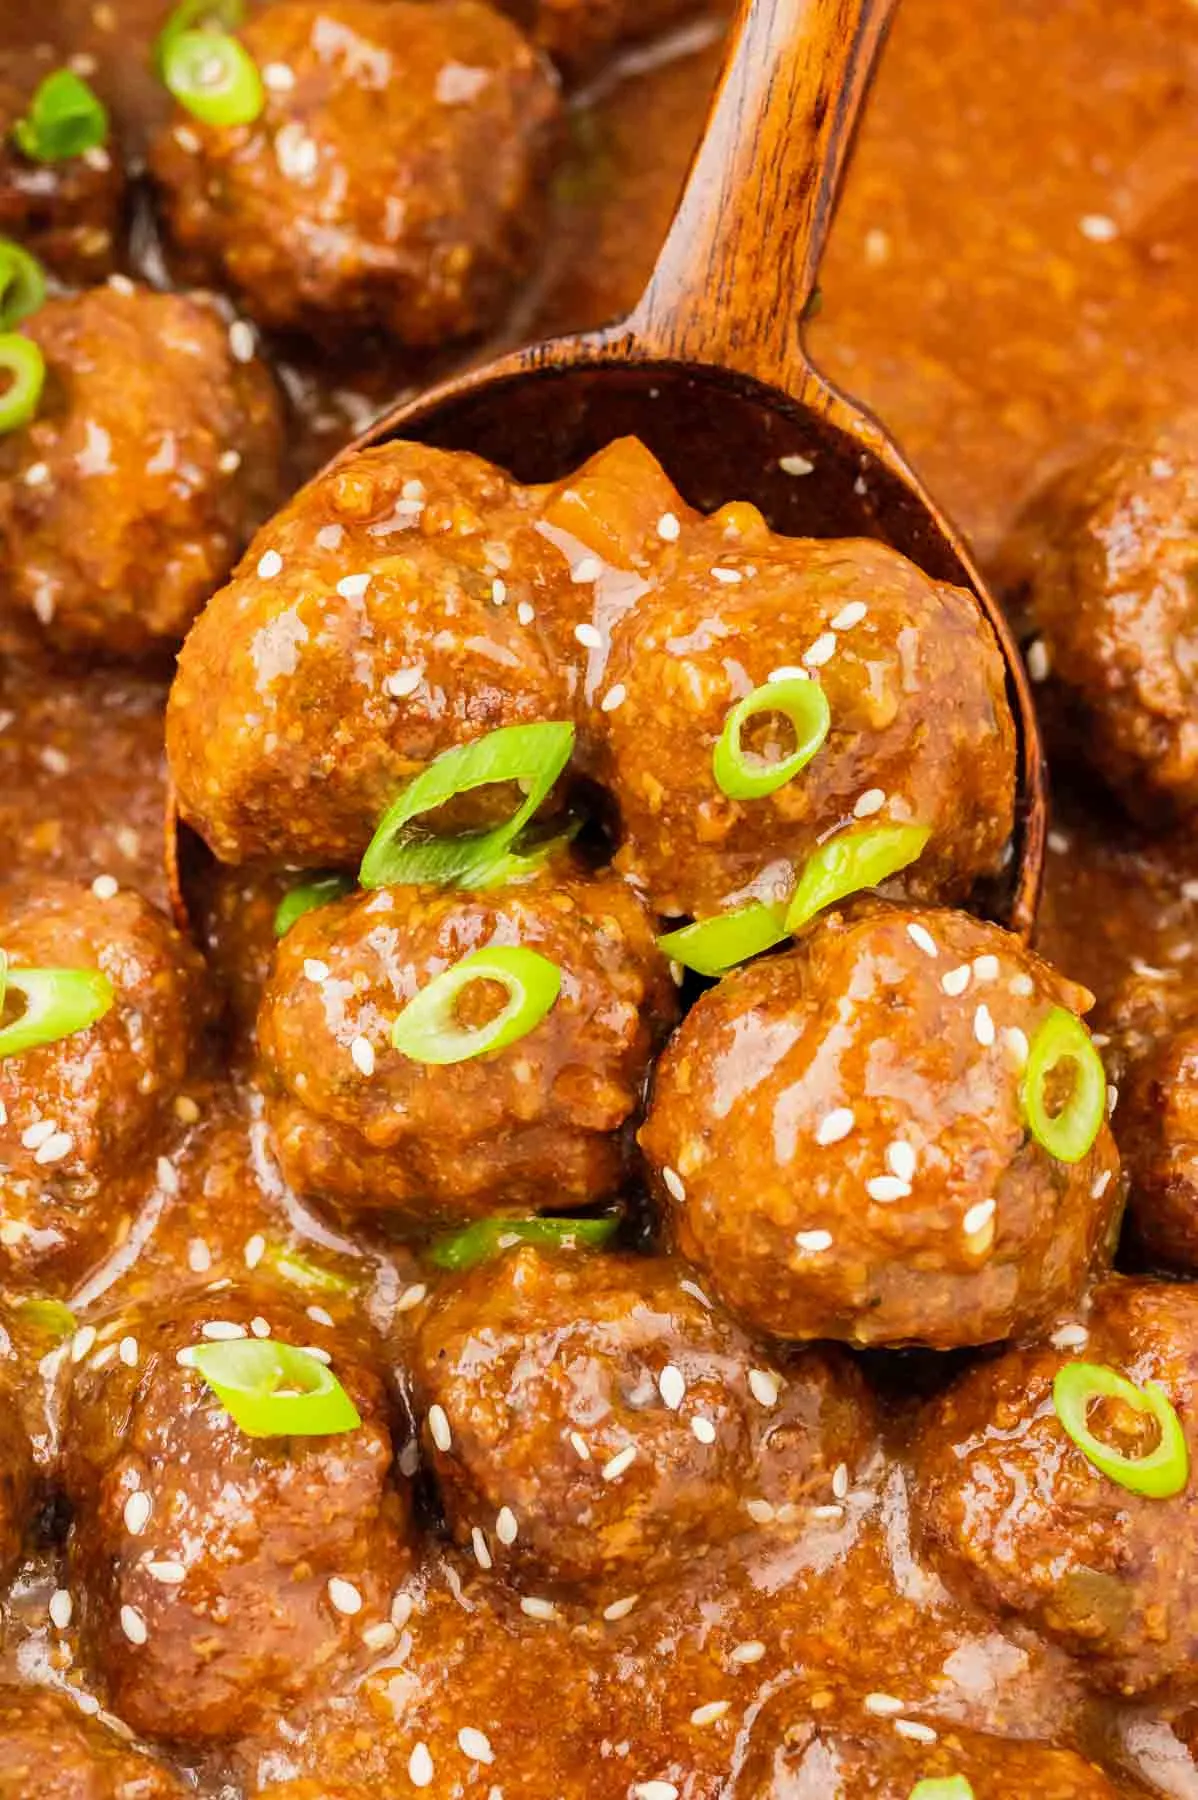 Crock Pot Teriyaki Meatballs are homemade slow cooker beef meatballs with a sweet and savory sauce containing pineapple, soy sauce and brown sugar.